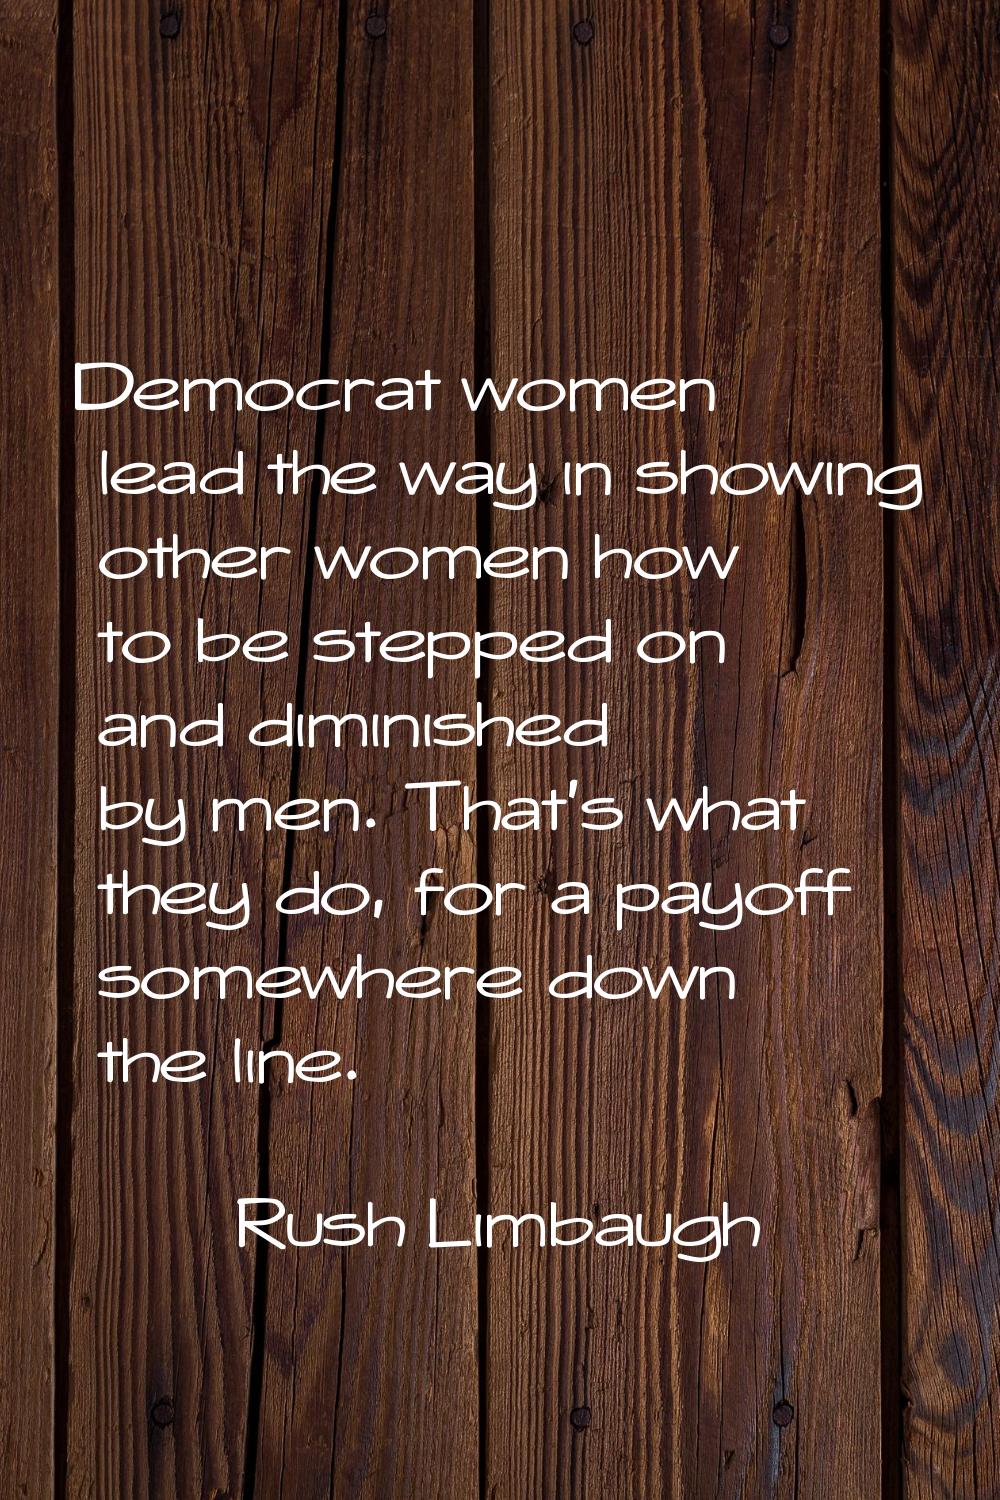 Democrat women lead the way in showing other women how to be stepped on and diminished by men. That